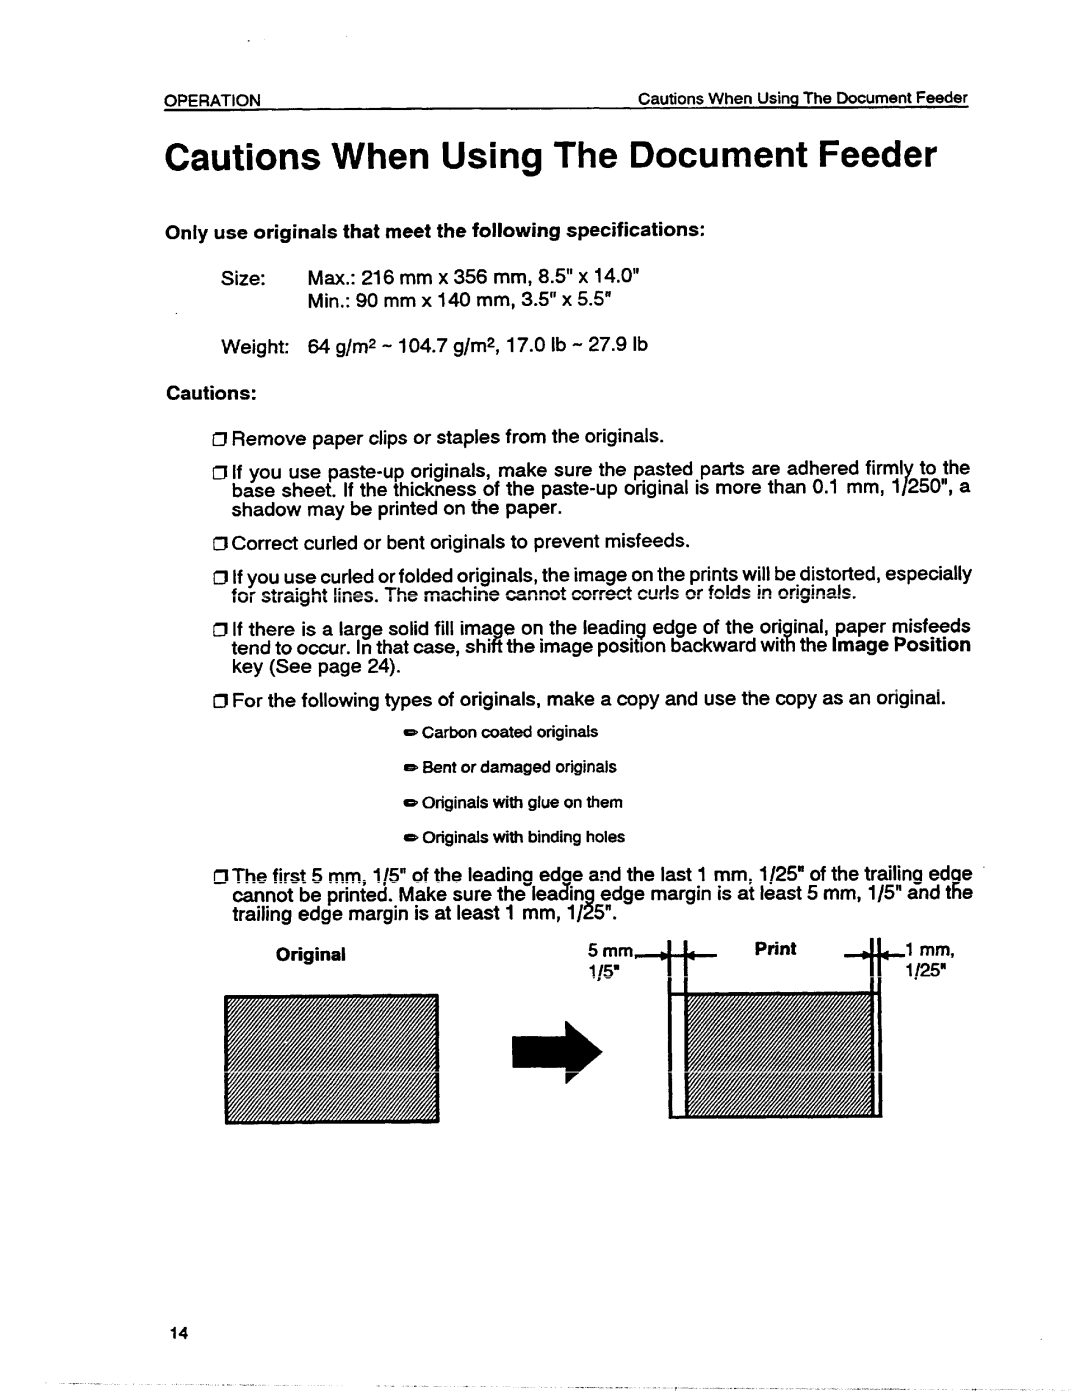 Ricoh VT1730 manual Cautions When Using The Document Feeder, 1 mm 